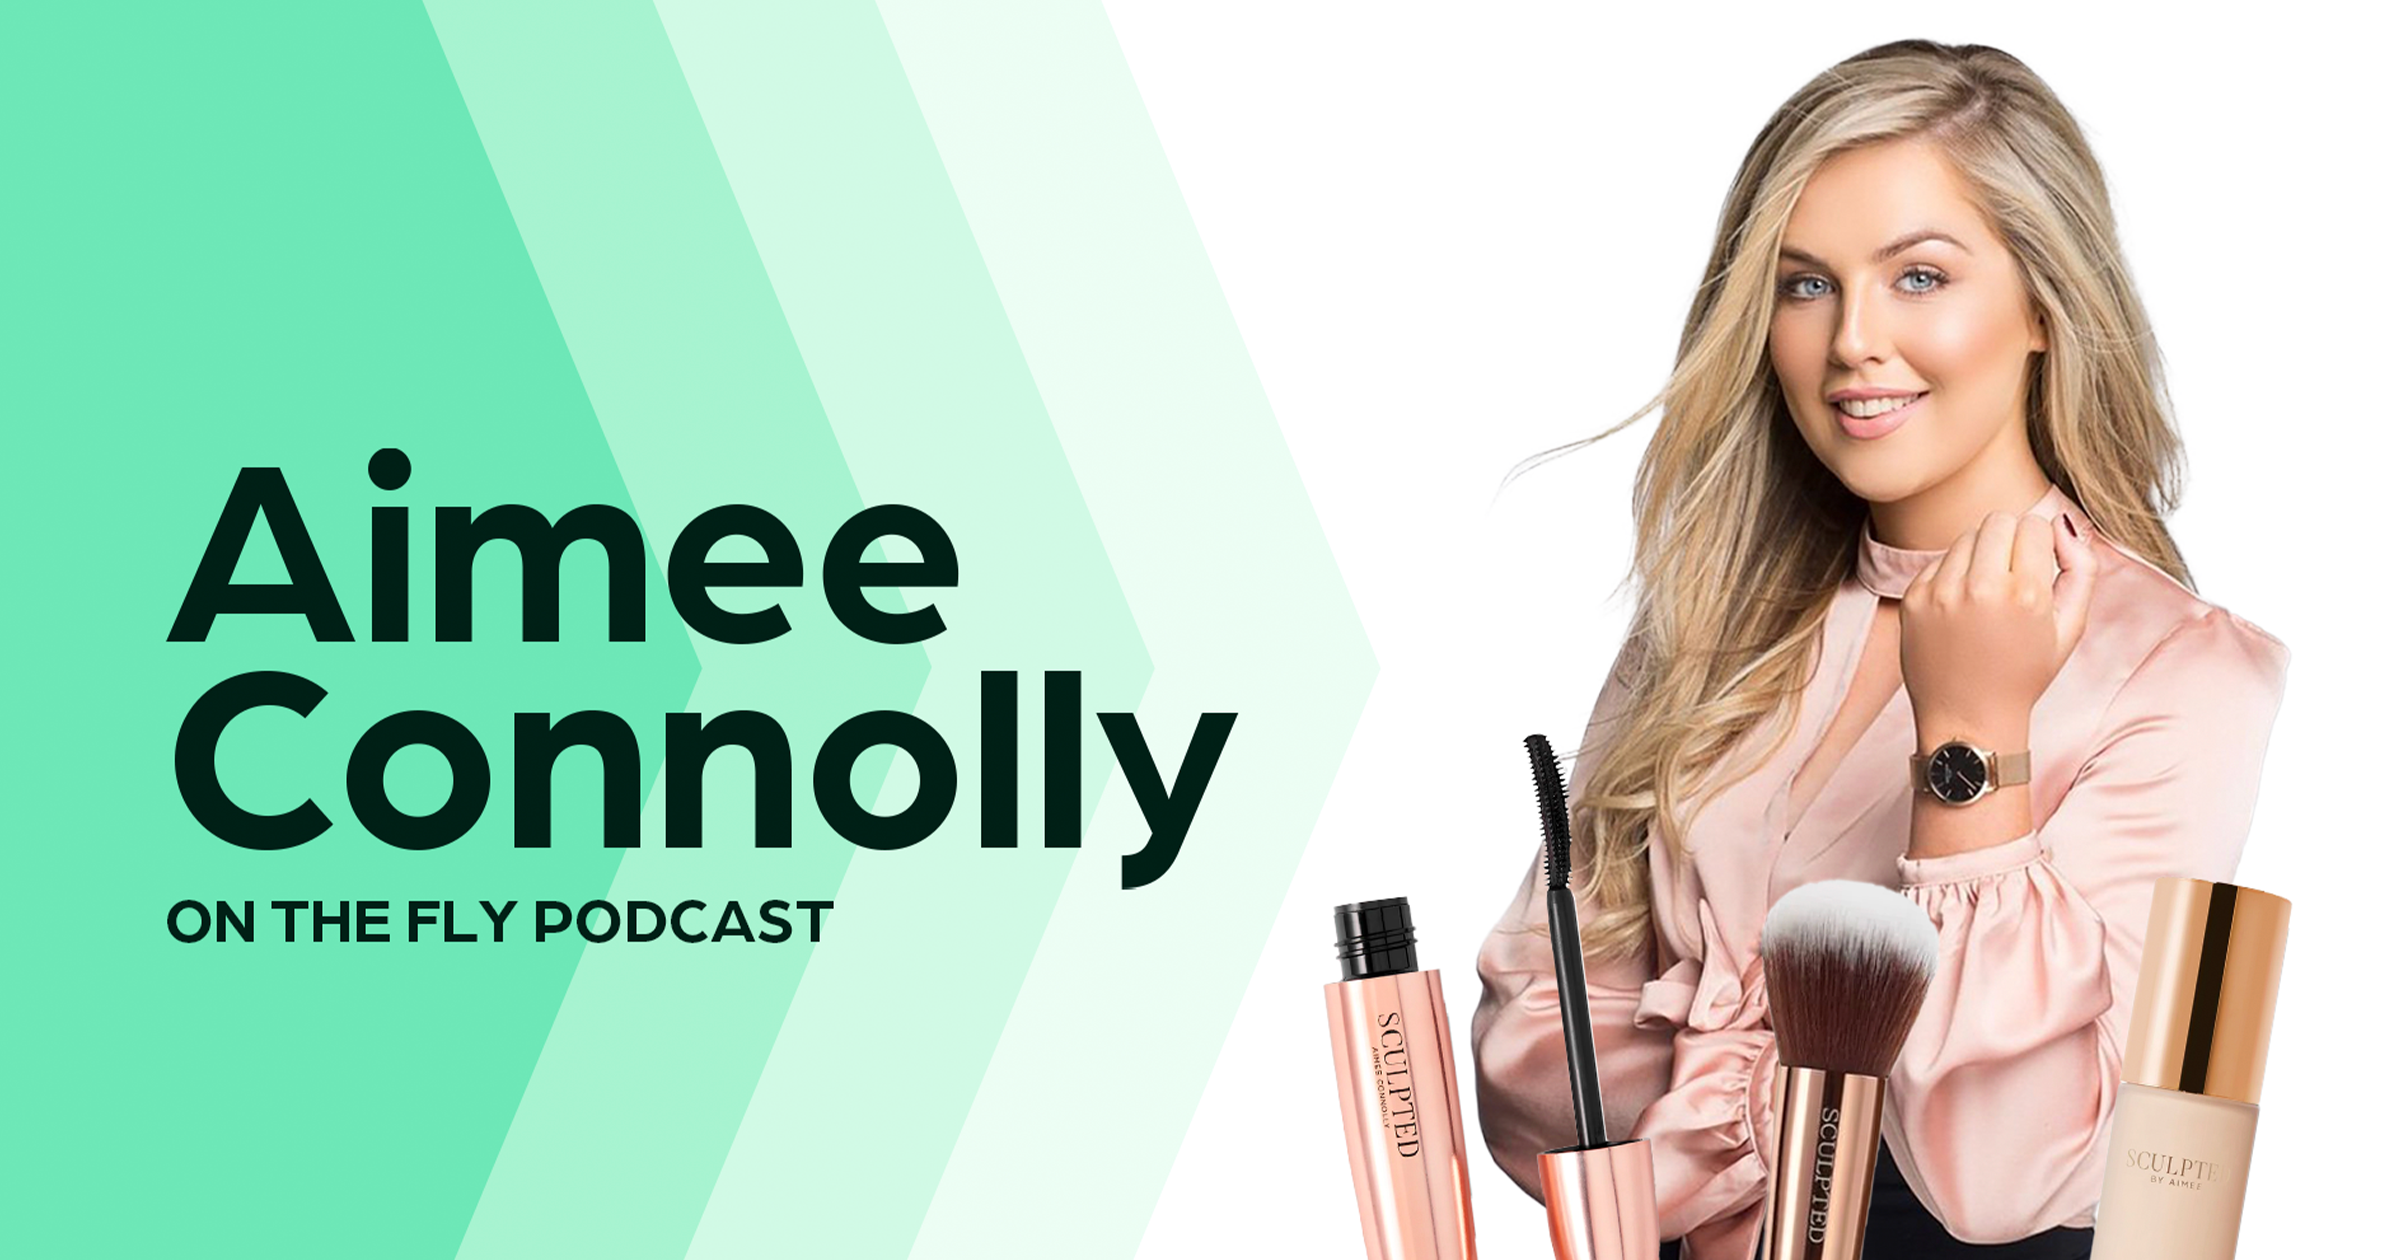 On the fly podcast with Aimee Connolly